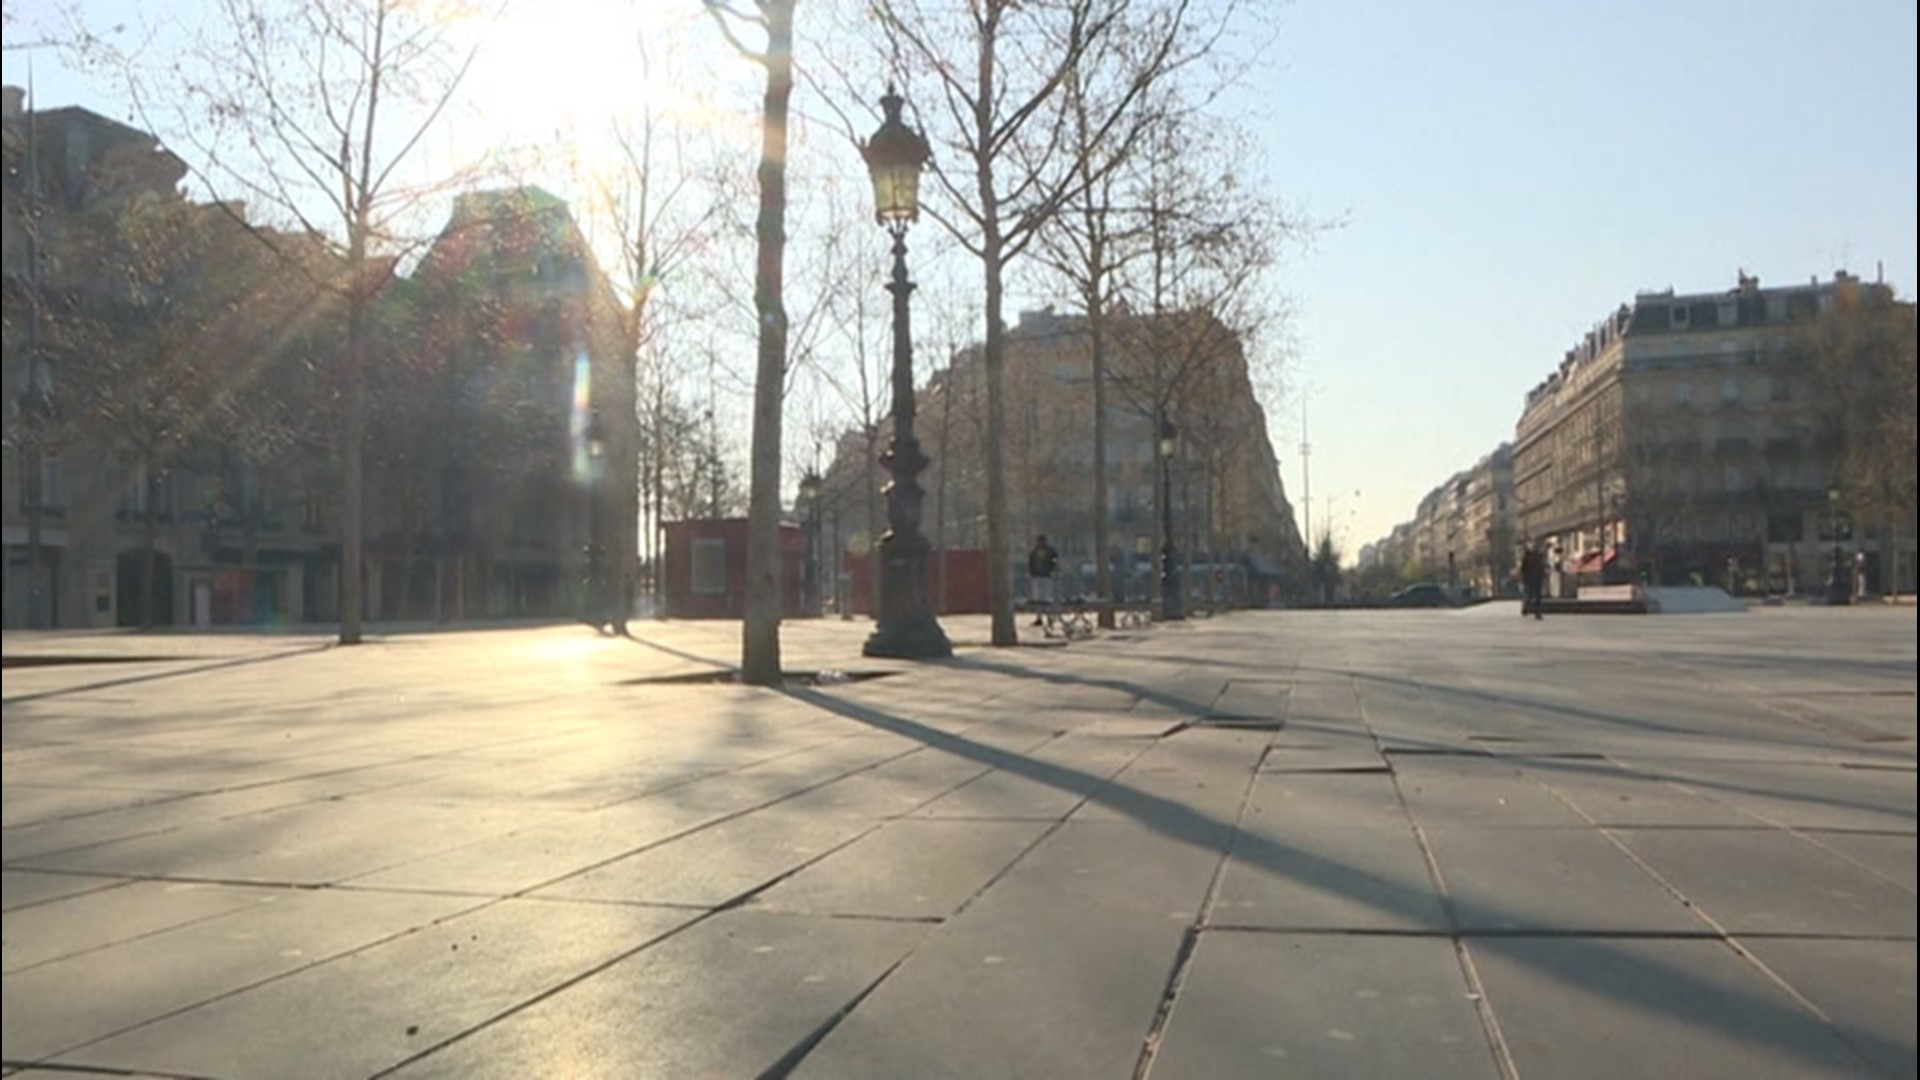 The streets and gathering spaces of Paris, France, were empty on April 2, as a lockdown continues due to coronavirus.